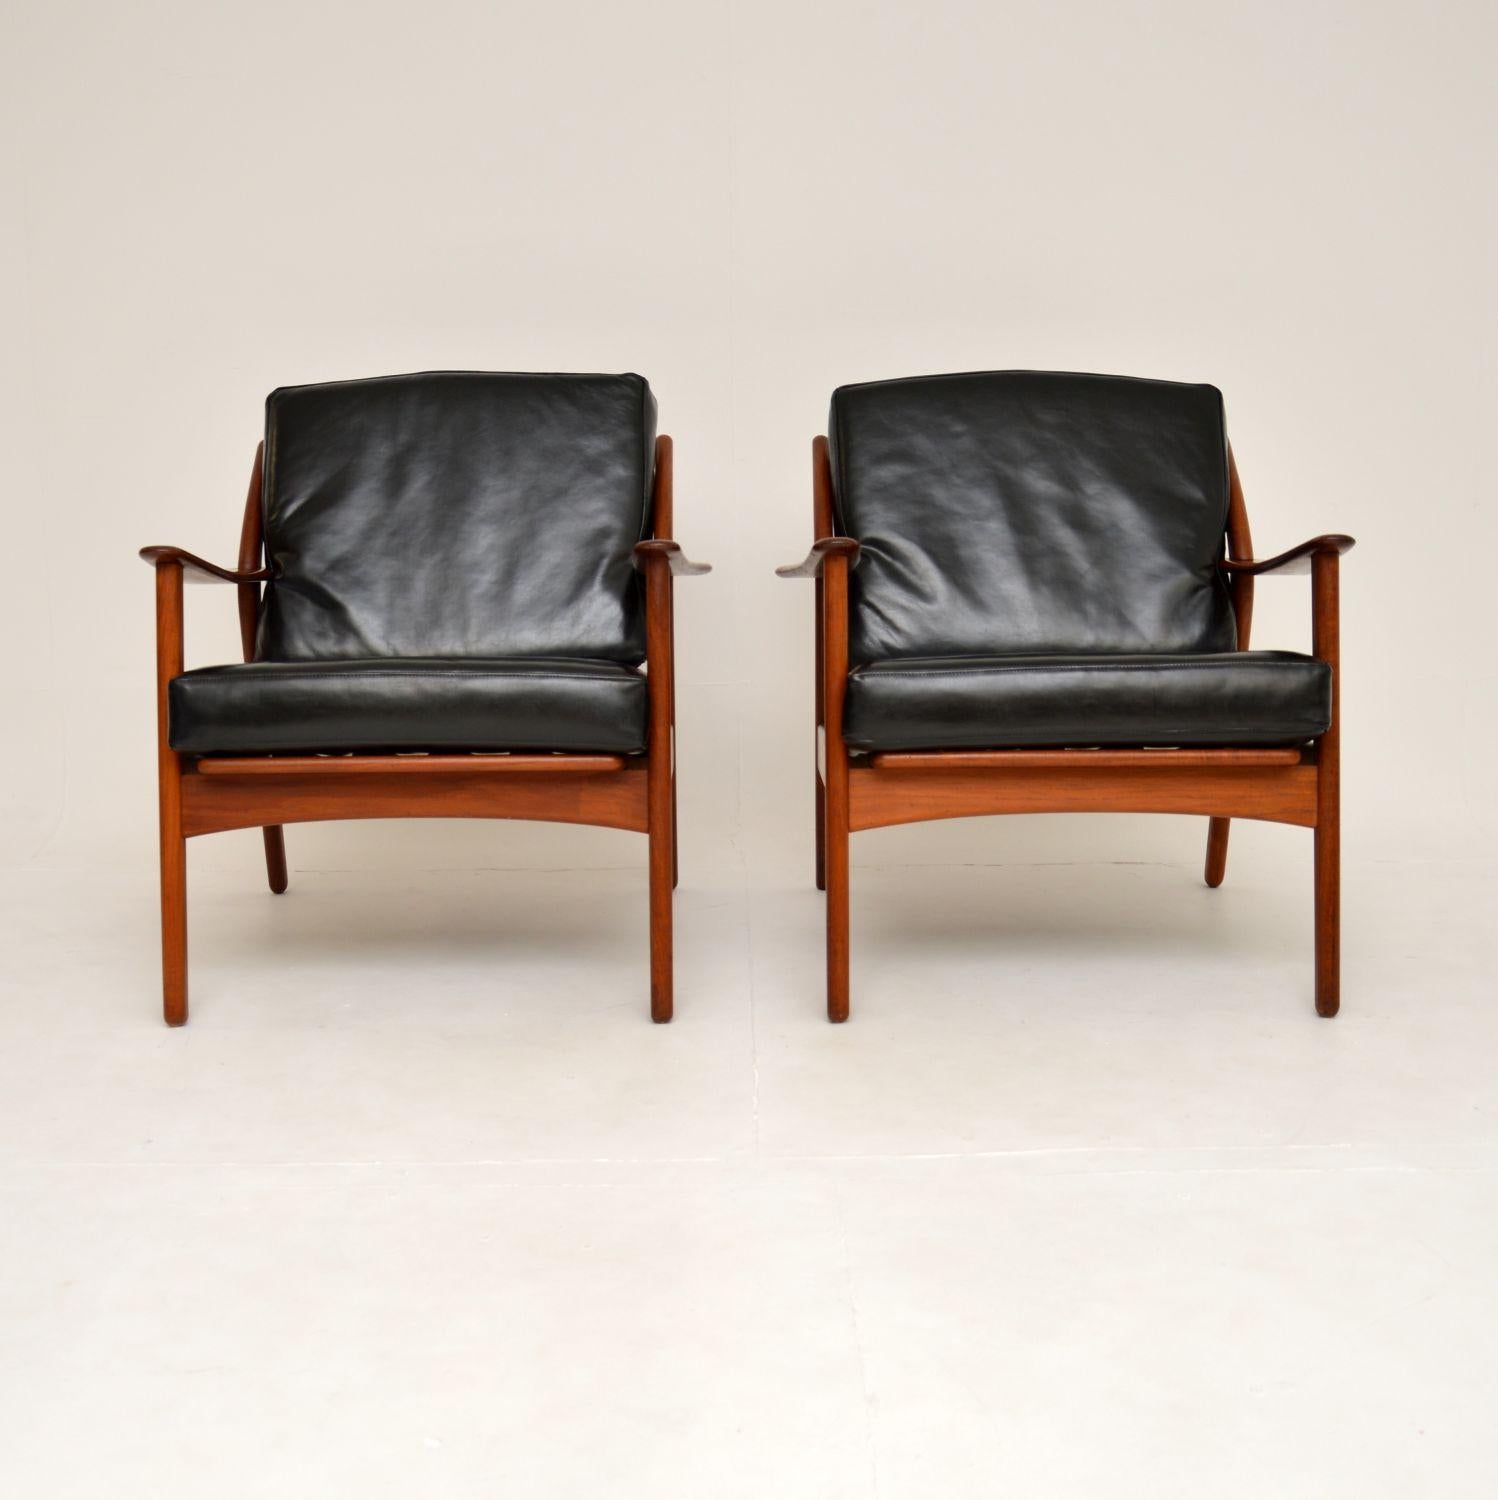 A stylish and extremely rare 1960’s pair of vintage Danish armchairs by Niels Koefoed in solid teak and leather.

The quality is superb, they have a beautiful and curvaceous design, with solid teak construction throughout.

The condition is